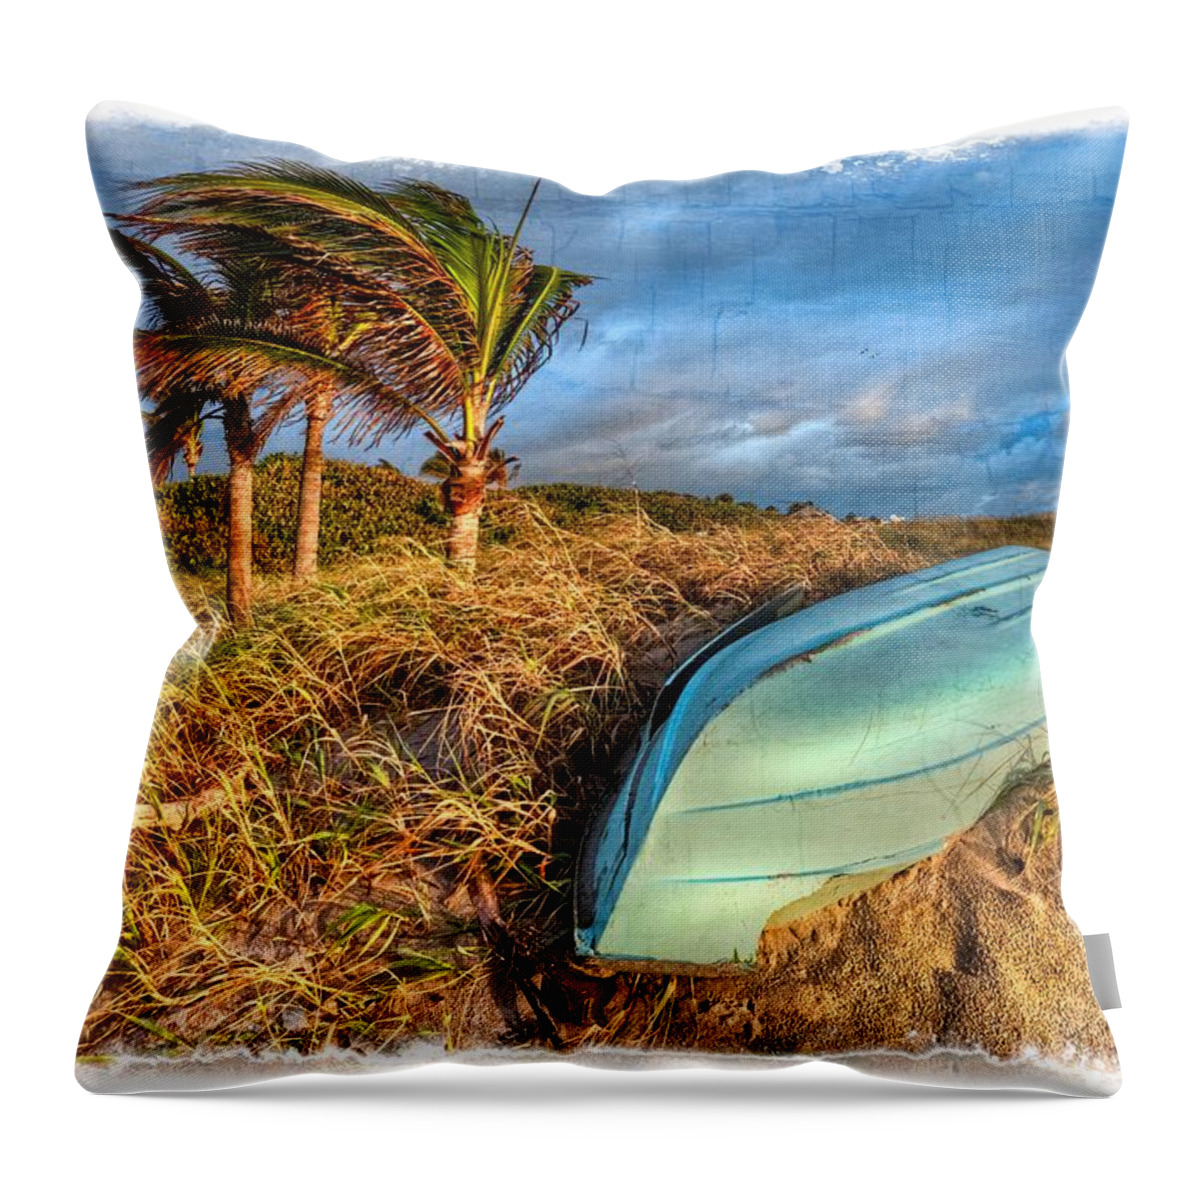 Boats Throw Pillow featuring the photograph The Old Blue Boat by Debra and Dave Vanderlaan